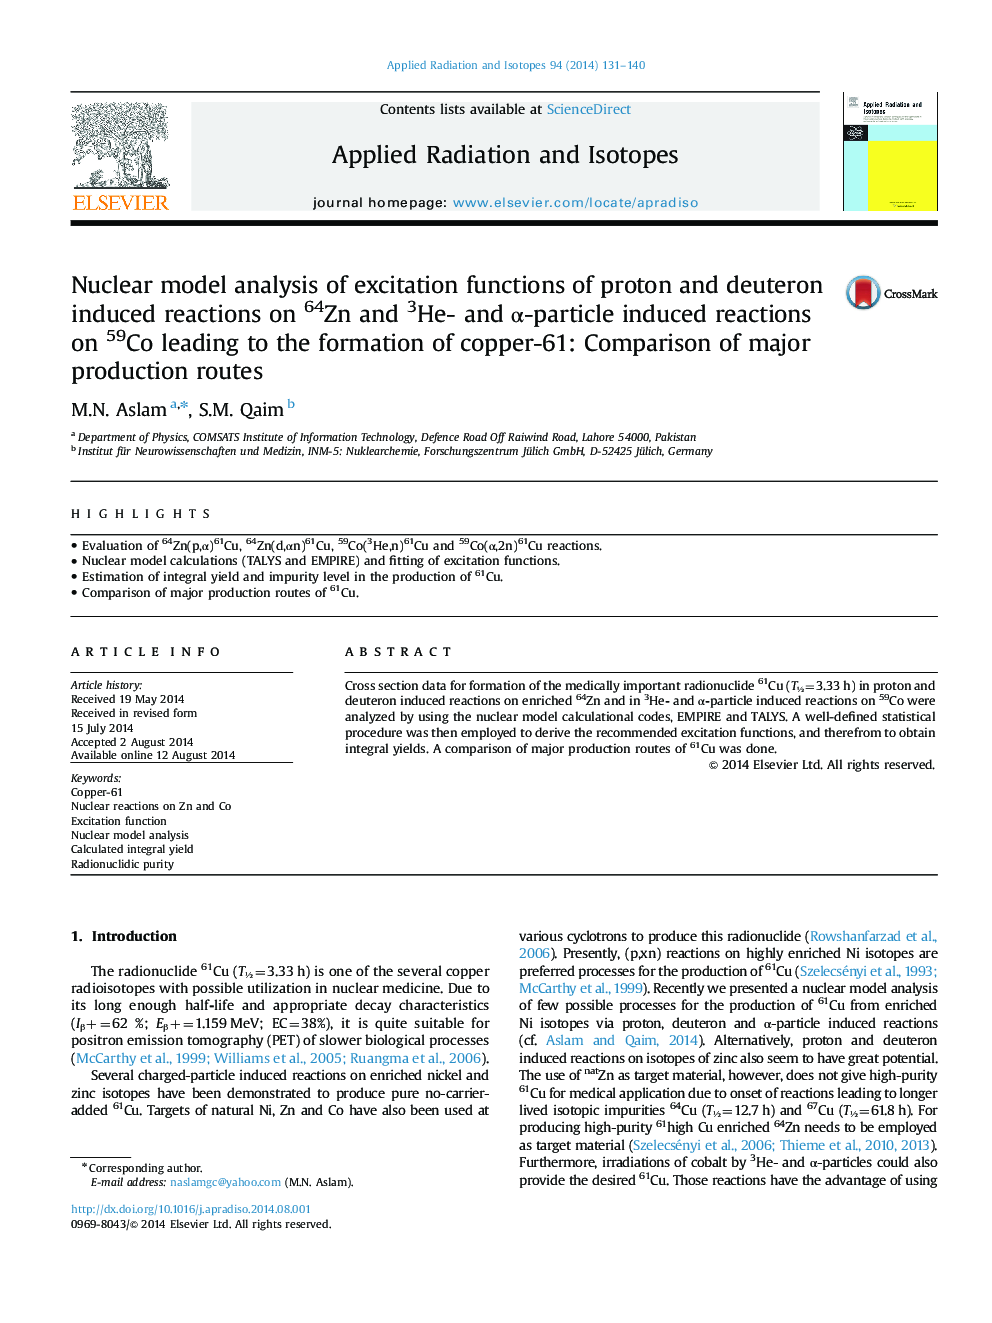 Nuclear model analysis of excitation functions of proton and deuteron induced reactions on 64Zn and 3He- and Î±-particle induced reactions on 59Co leading to the formation of copper-61: Comparison of major production routes